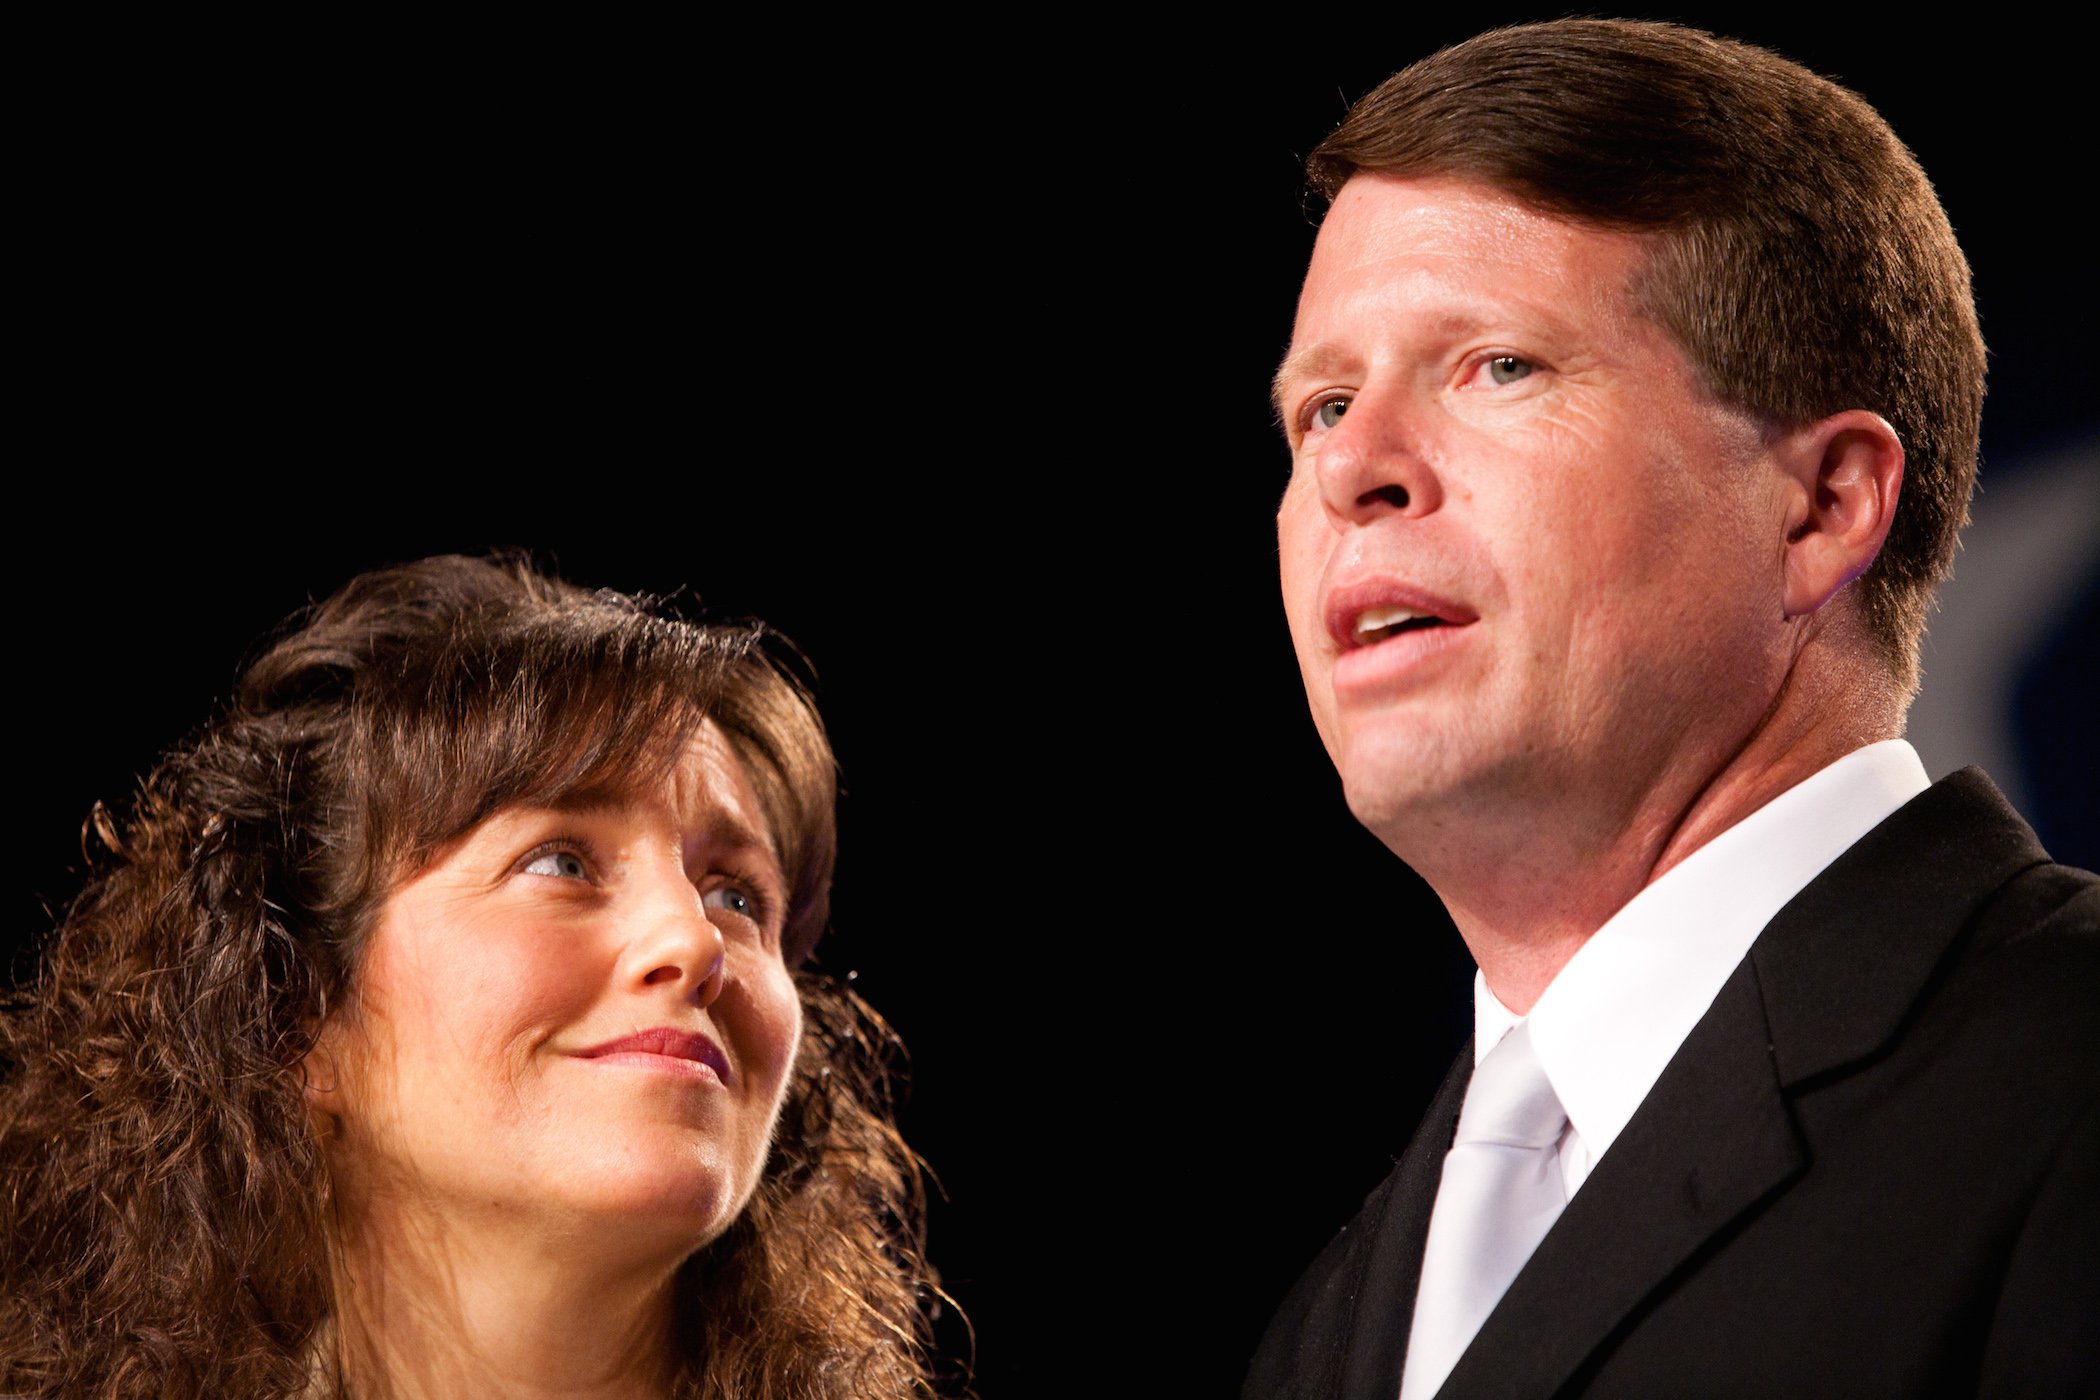 Jim Bob Duggar and Michelle Duggar from TLC's 'Counting On'